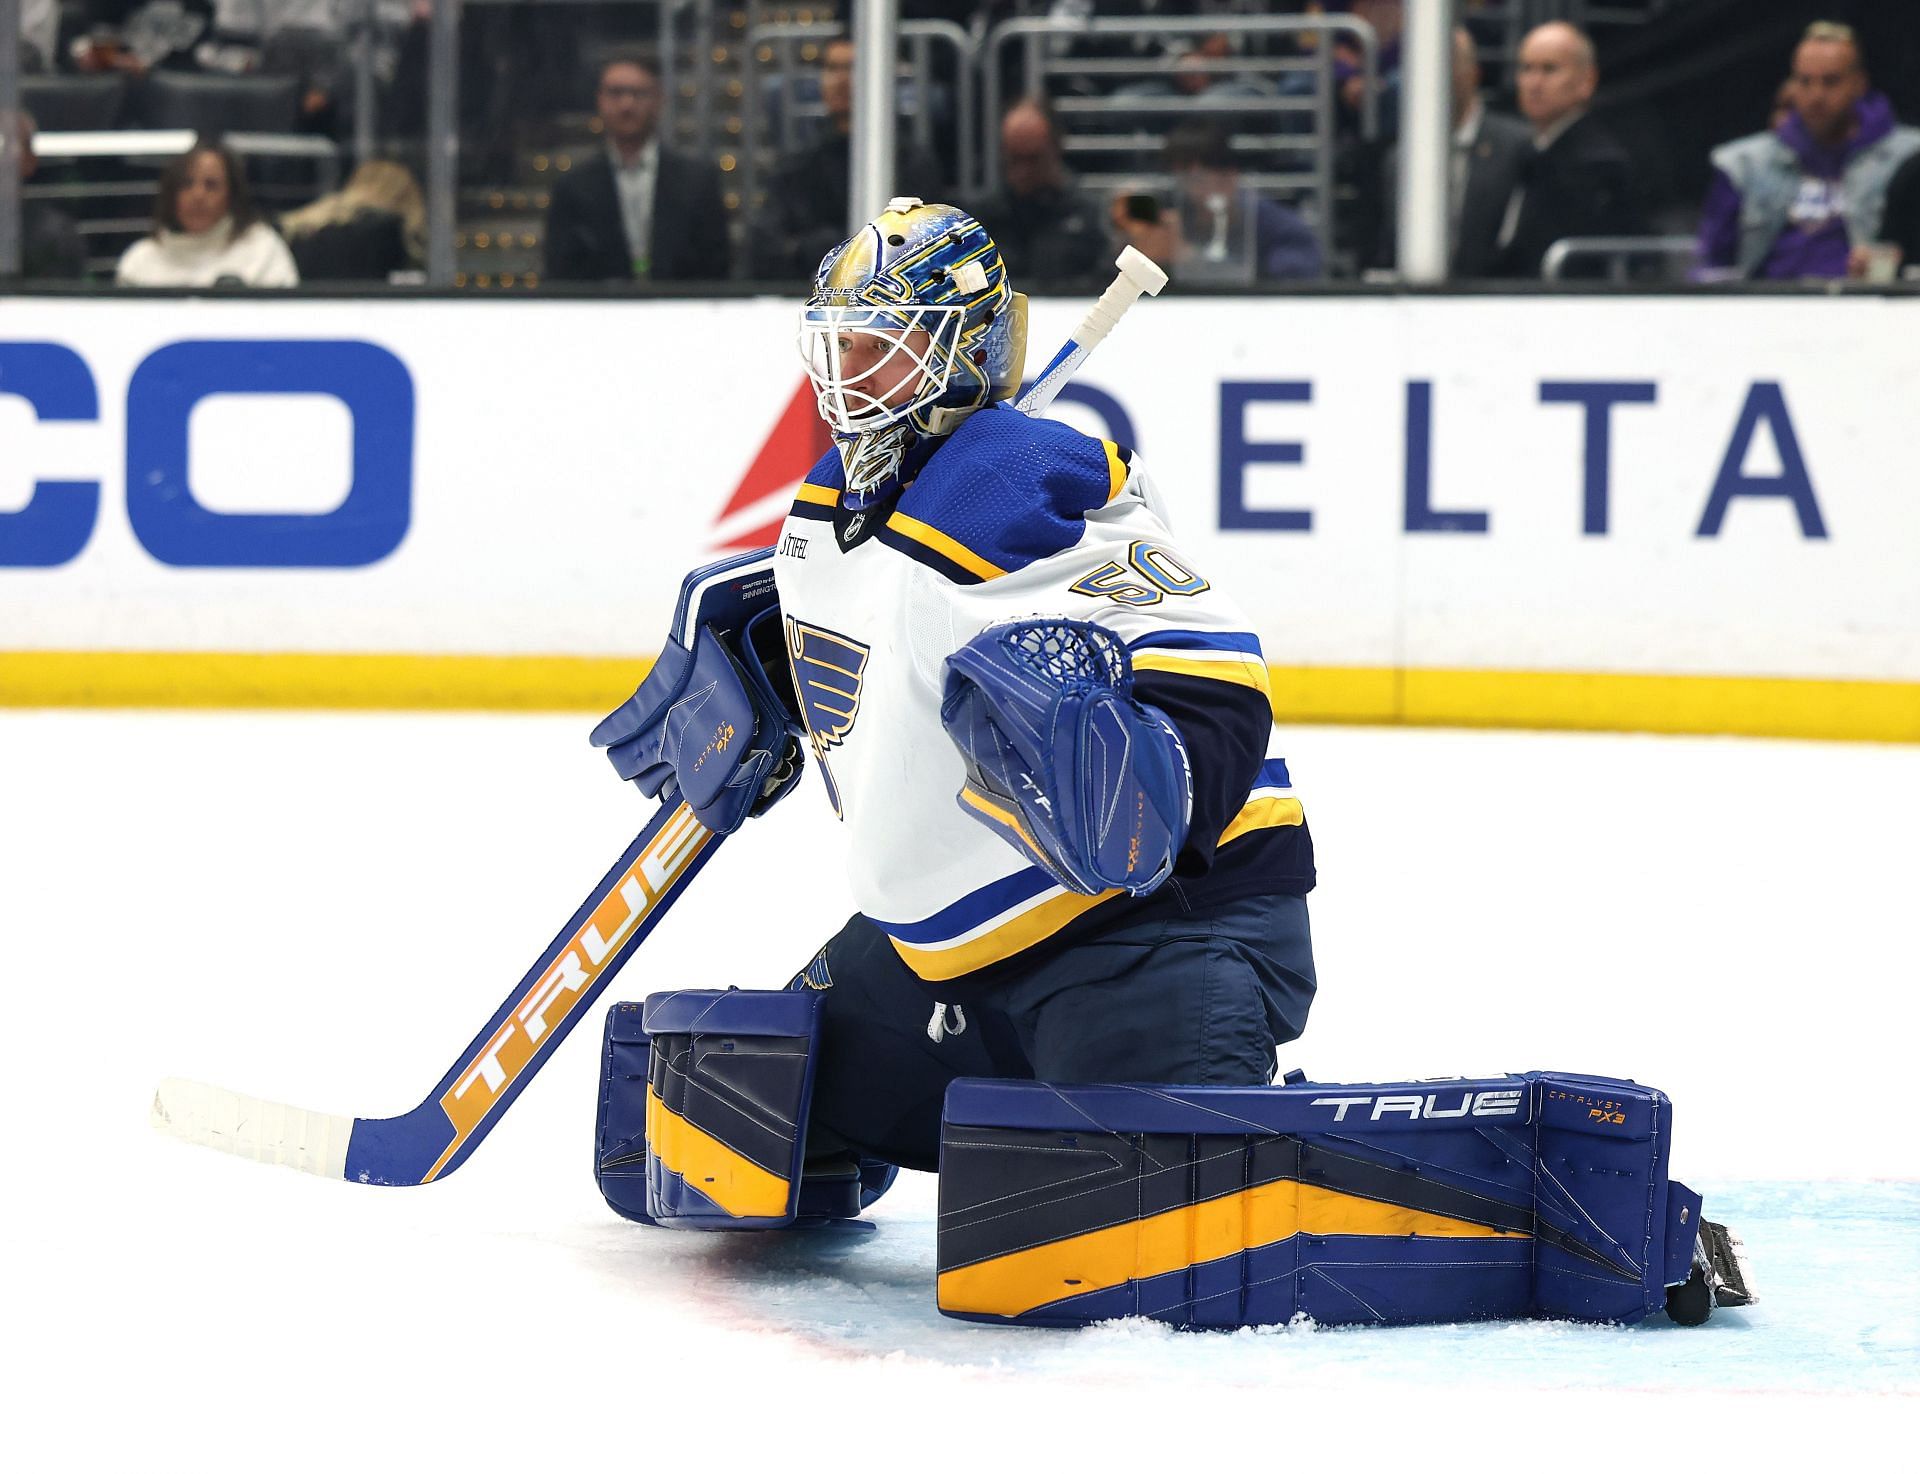 Binnington suspended 2 games for roughing, unsportsmanlike conduct